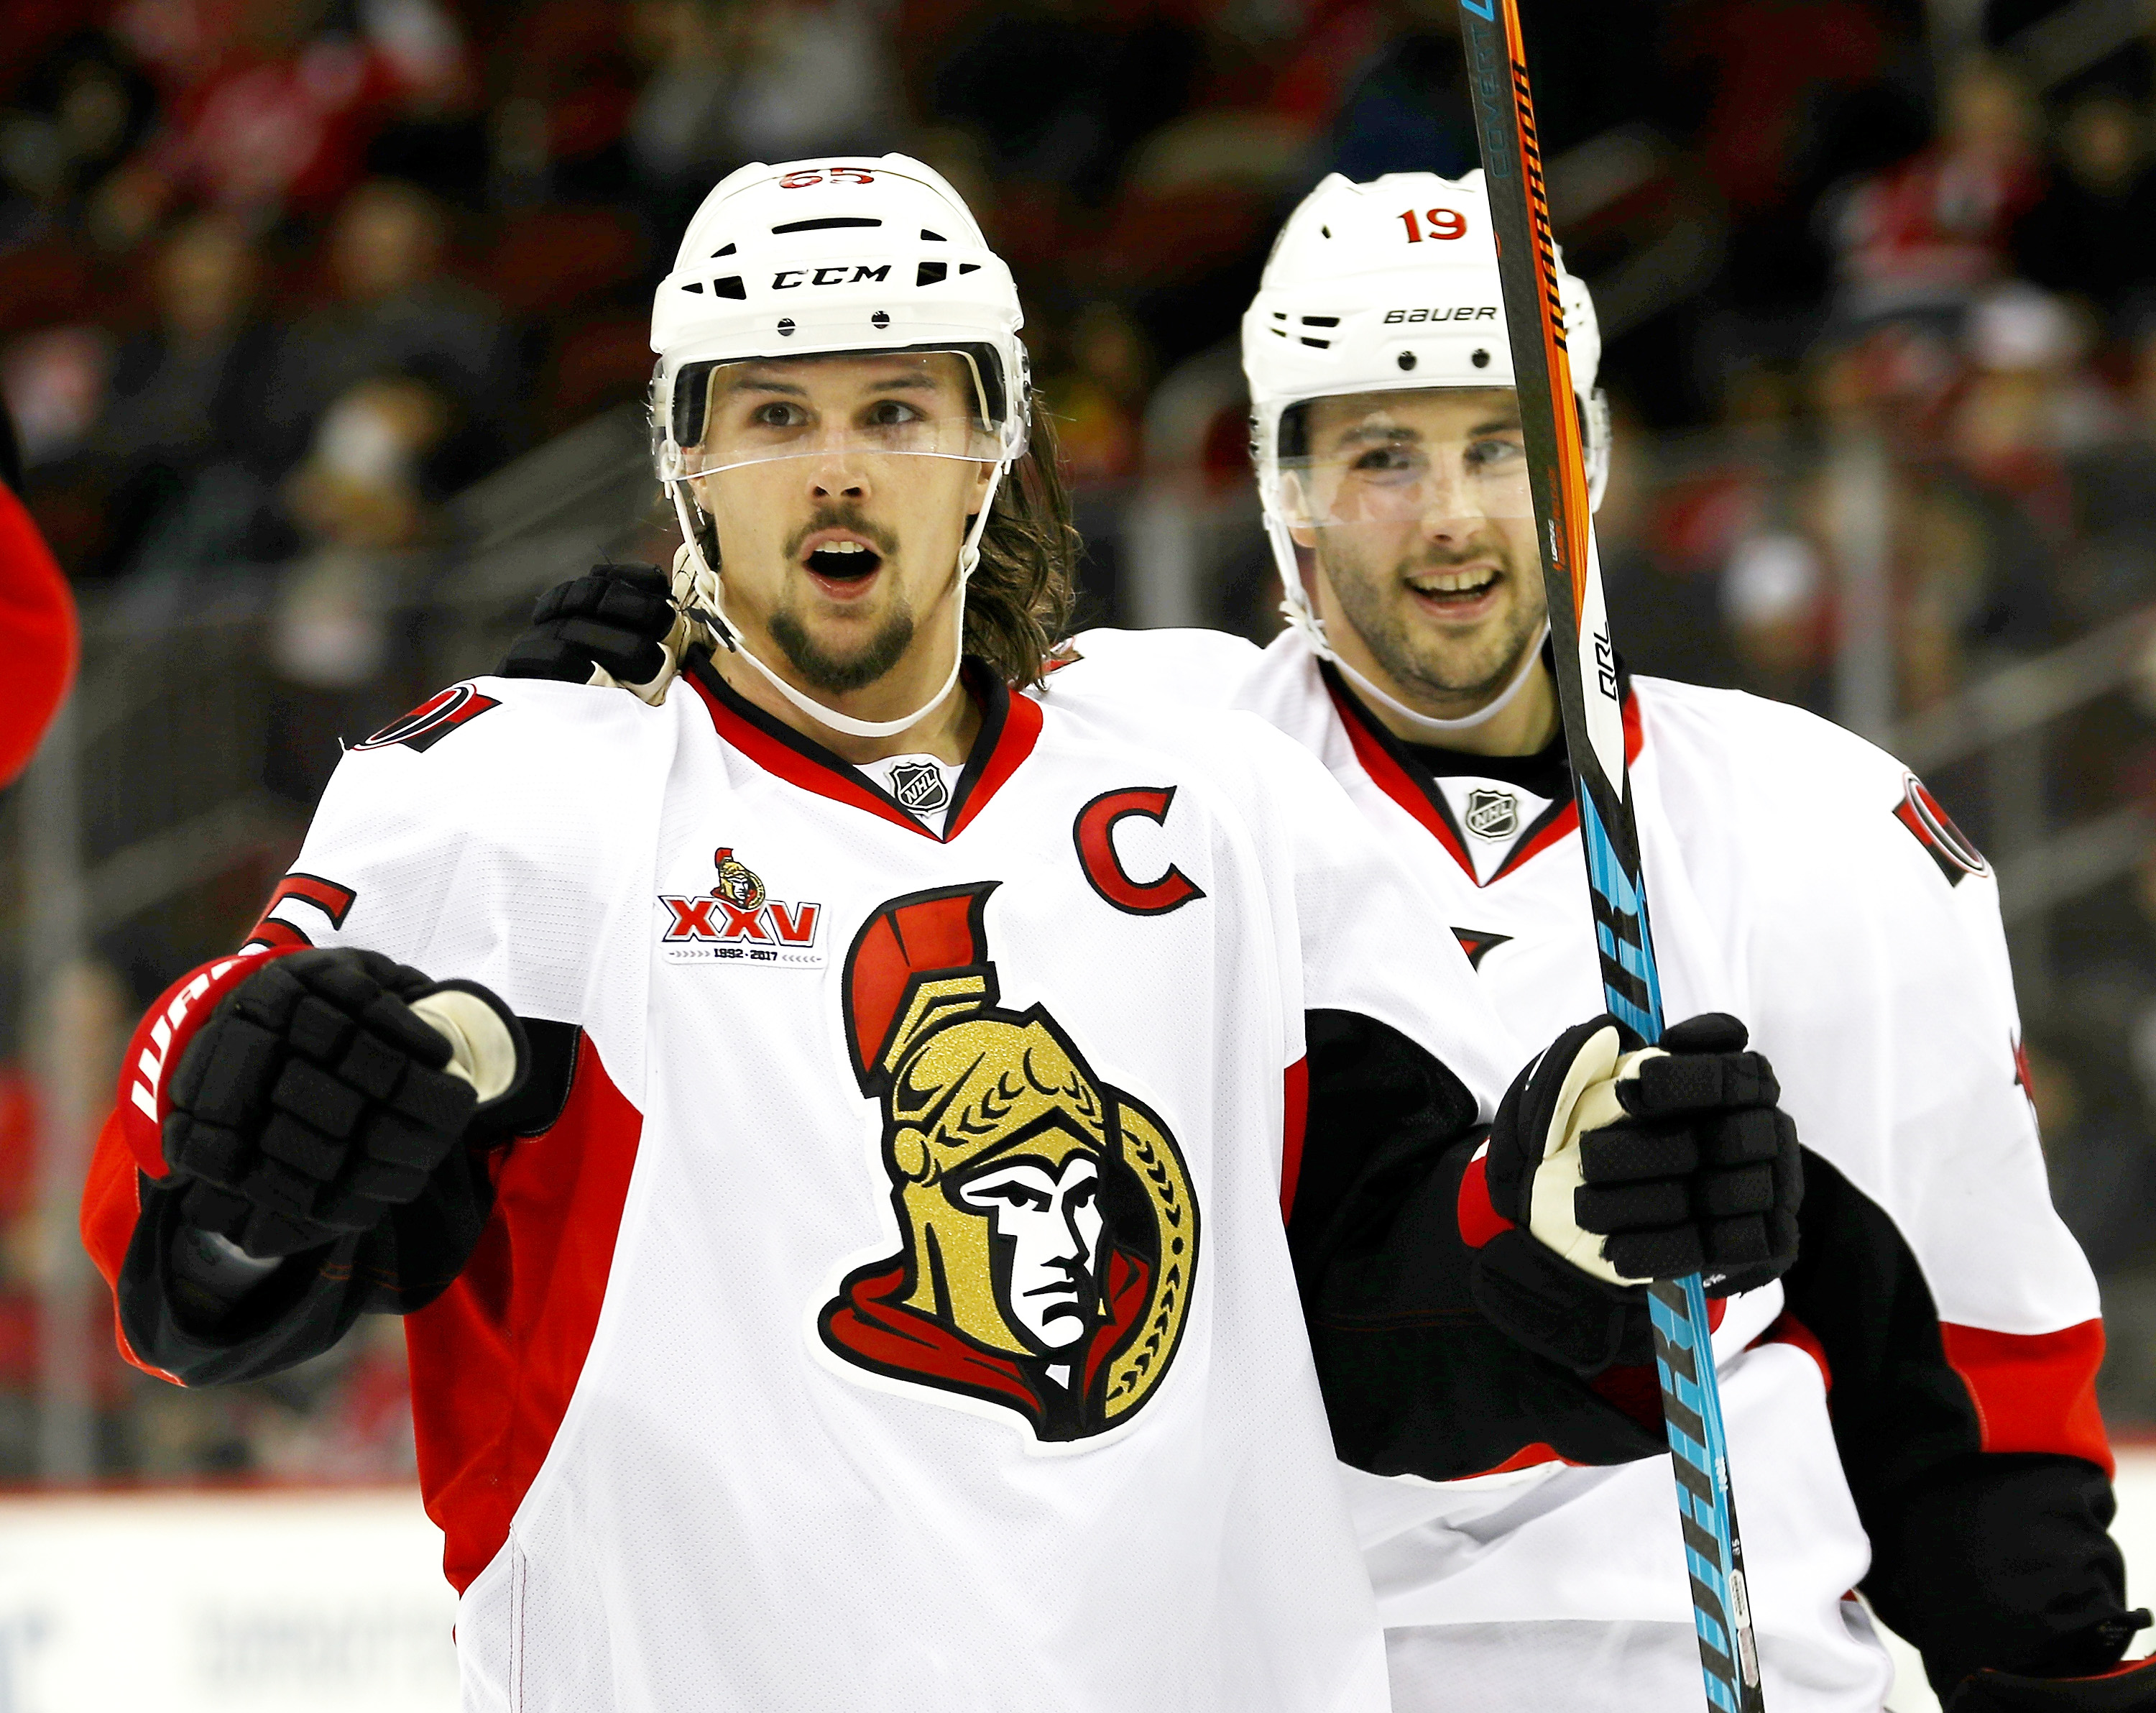 NEWARK, NJ - FEBRUARY 16: Erik Karlsson #65 of the Ottawa Senators celebrates his goal as teammate Derick Brassard #19 stands by in the third period against the New Jersey Devils on February 16, 2017 at Prudential Center in Newark, New Jersey.The Ottawa Senators defeated the New Jersey Devils 3-0. (Photo by Elsa/Getty Images)